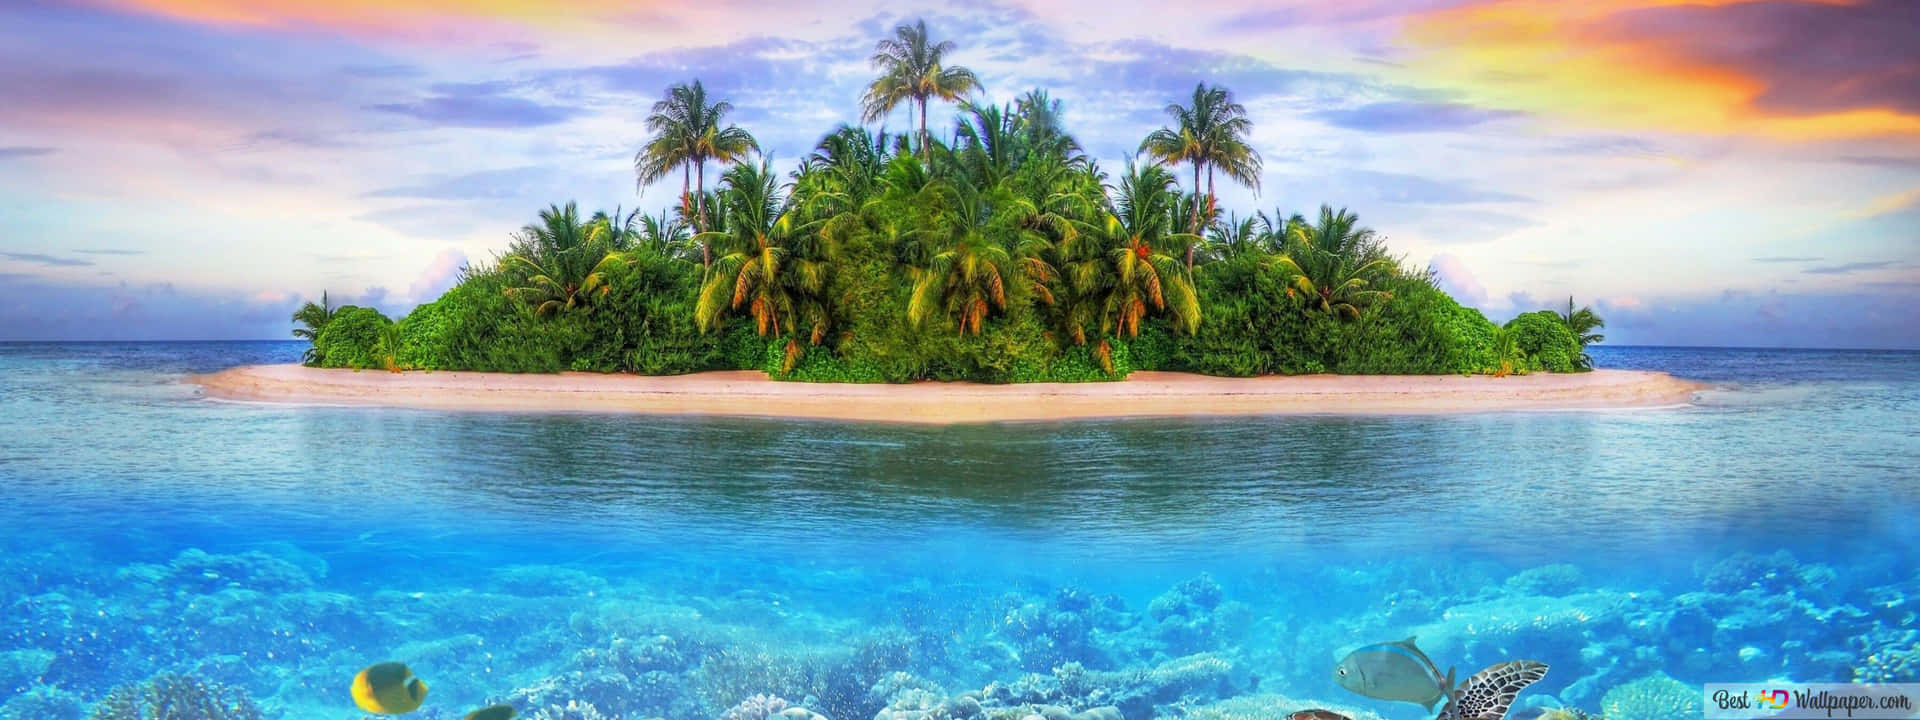 An Island With Palm Trees And Corals In The Ocean Wallpaper